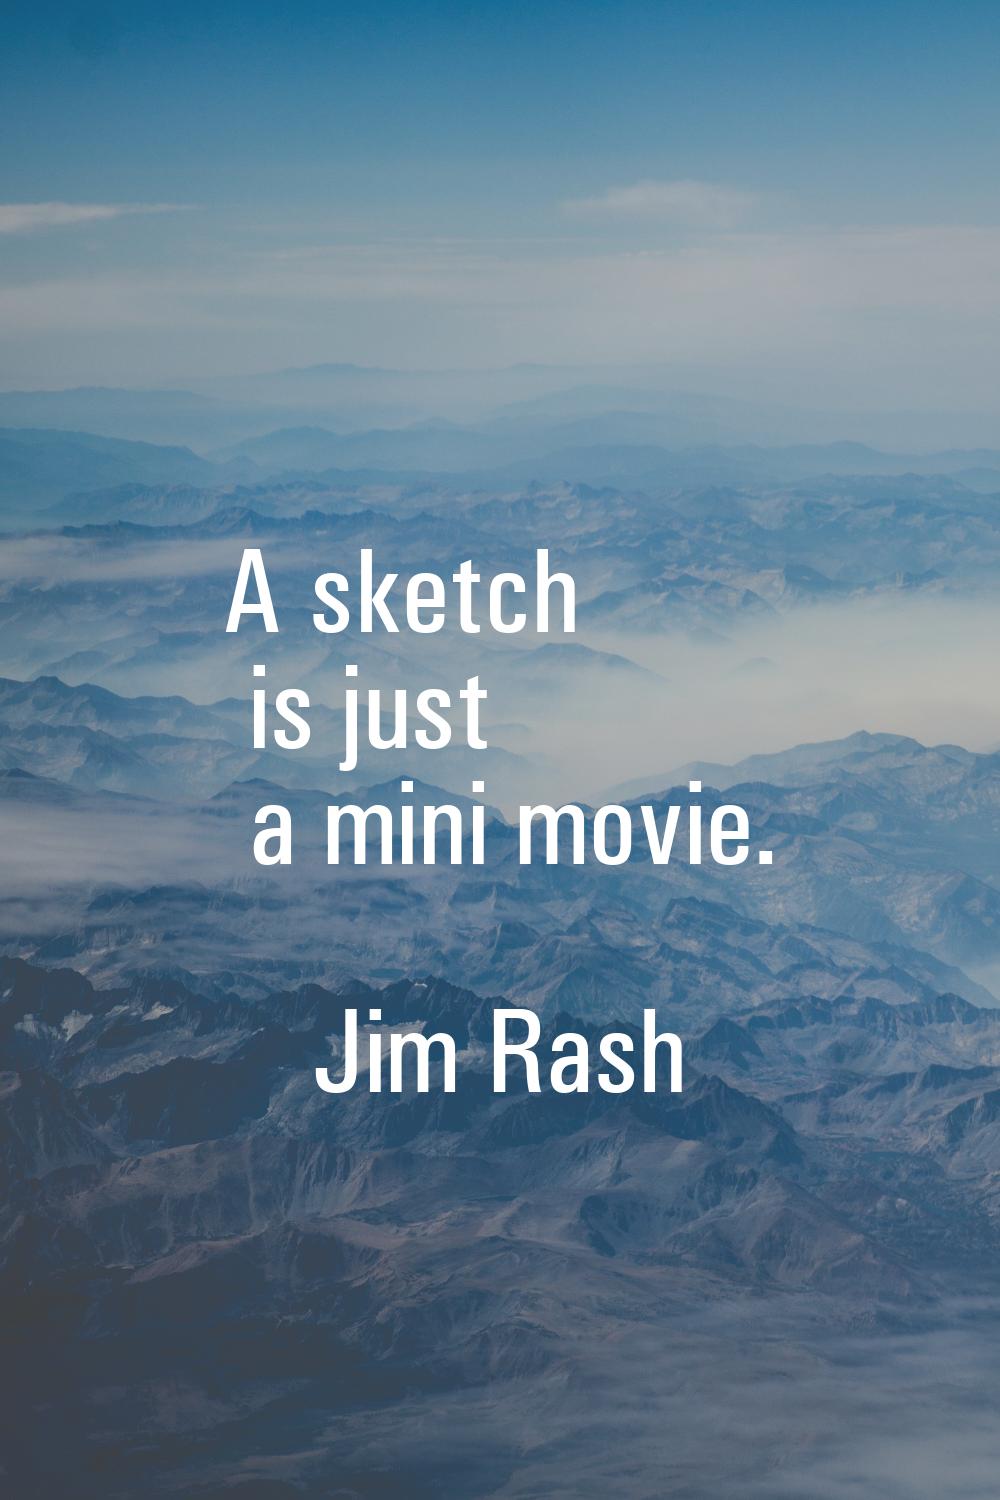 A sketch is just a mini movie.